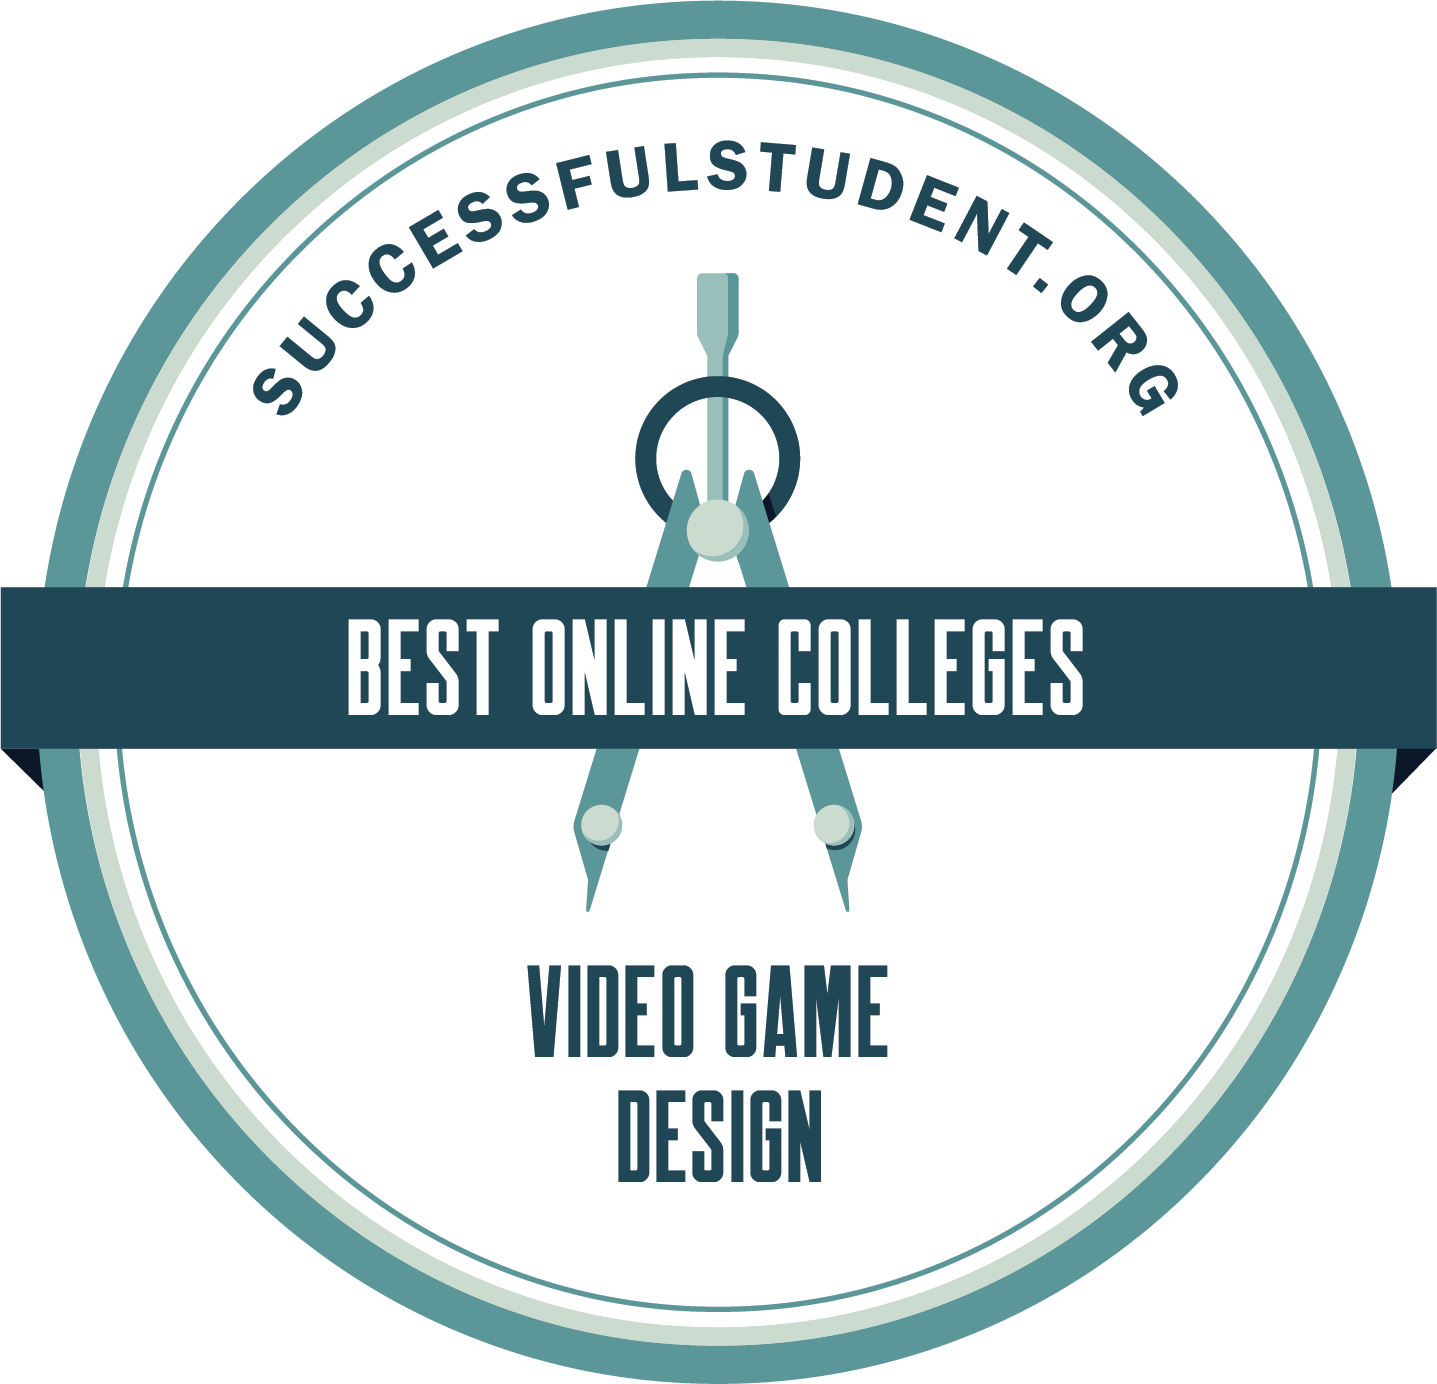 The 10 Best Online Video Game Design Colleges's Badge